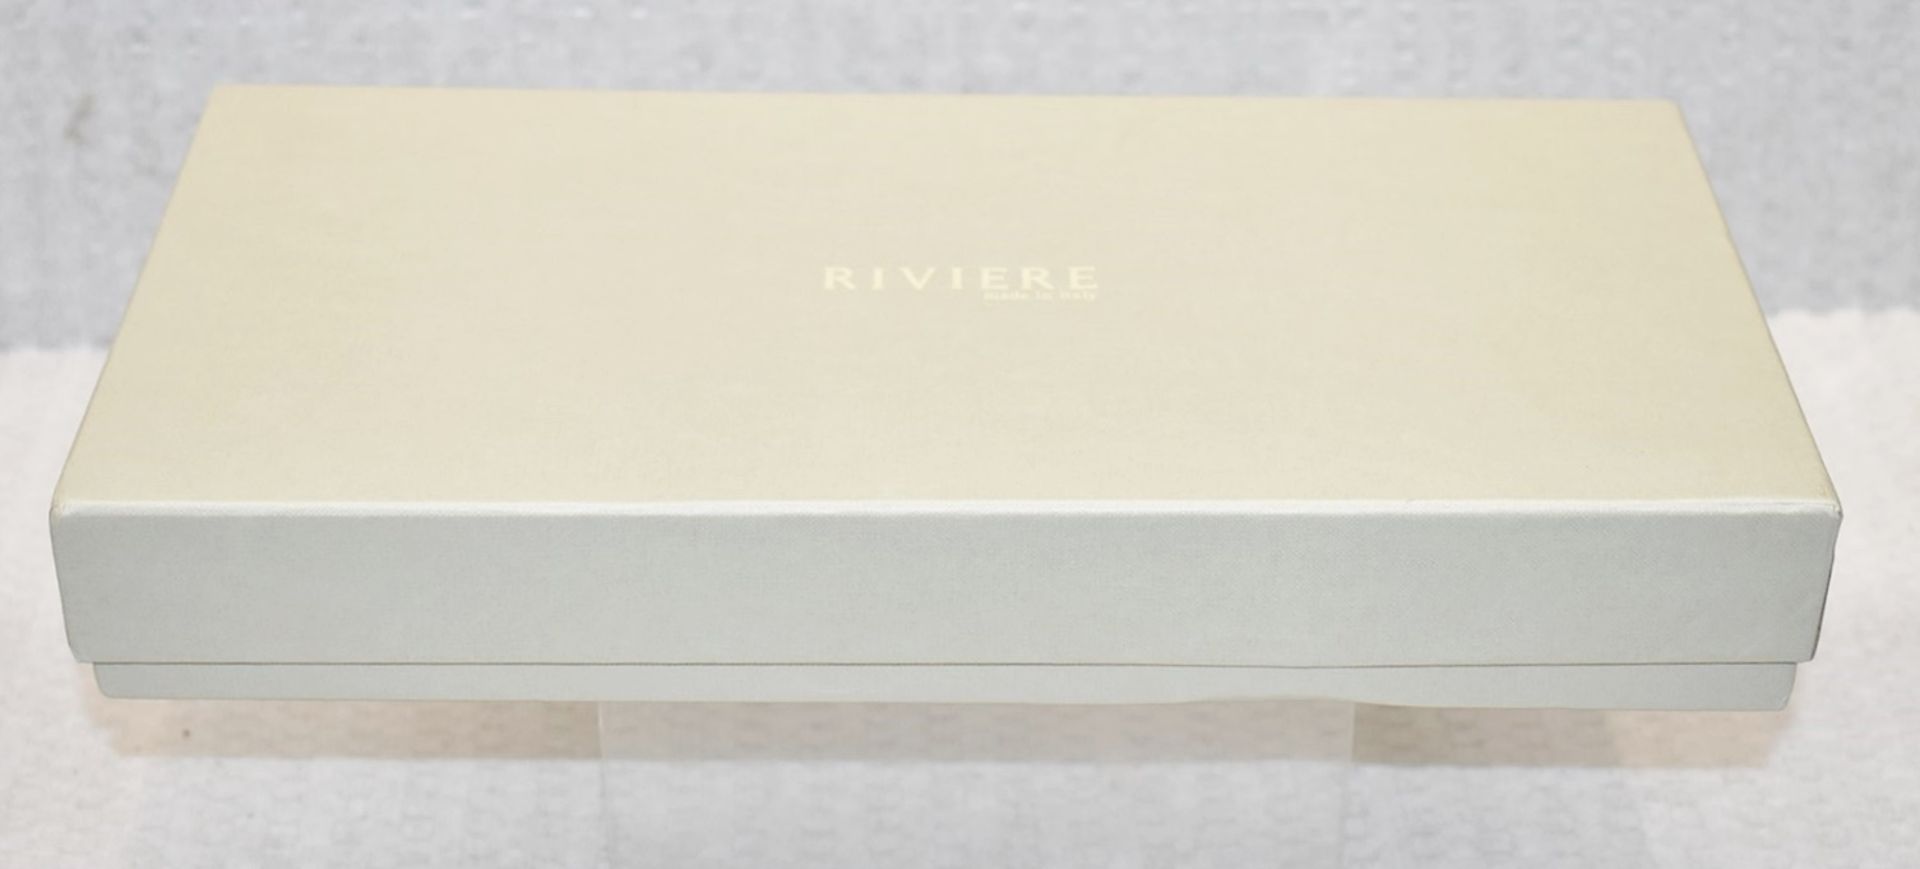 1 x RIVIERE Luxury Leather-Trim Lacquered Tray in Grey - Original Price £419.00 - Unused Boxed Stock - Image 2 of 9